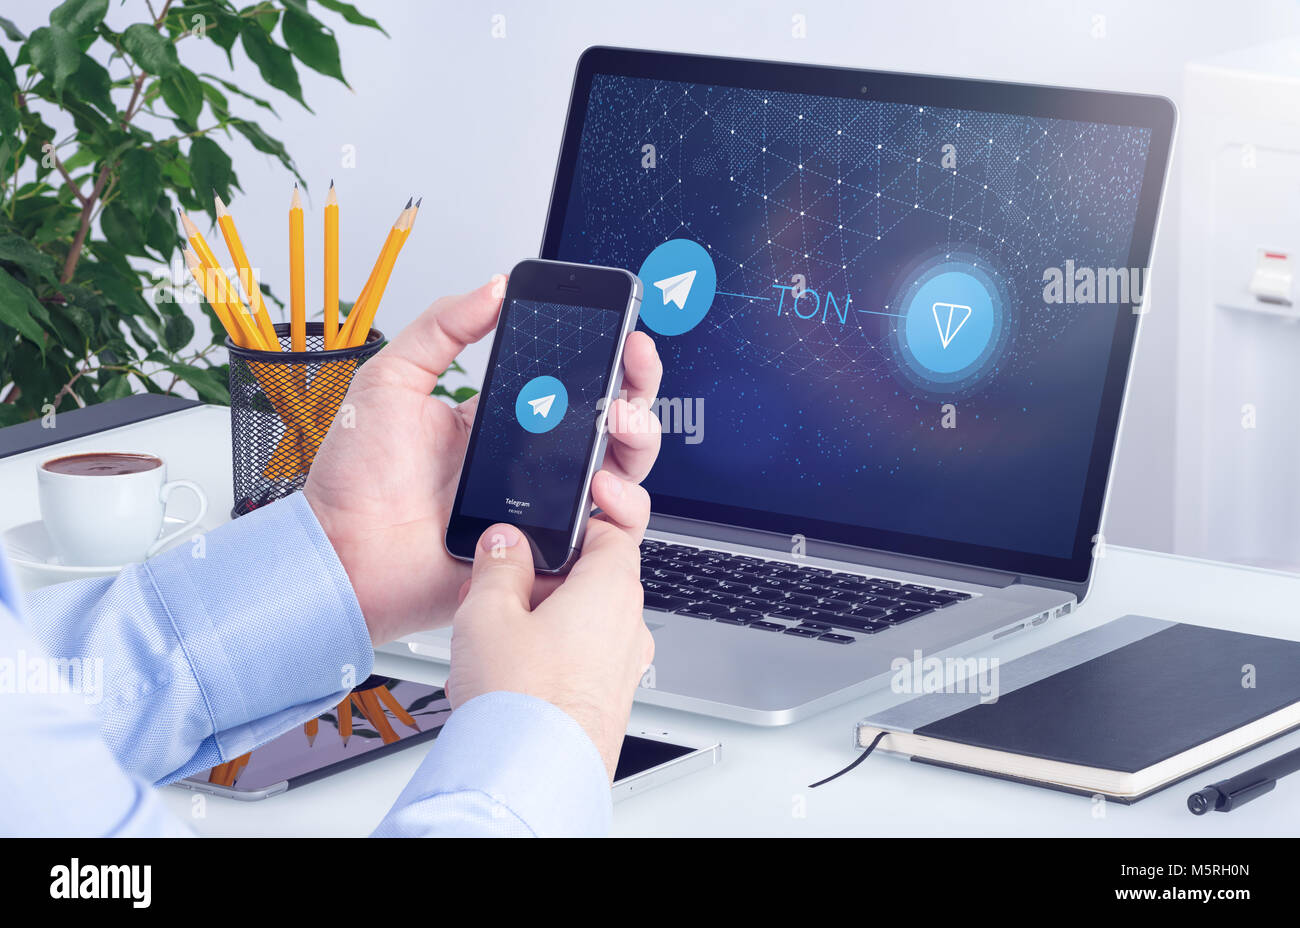 Telegram Open Network TON white paper on the smartphone and laptop screens. Stock Photo